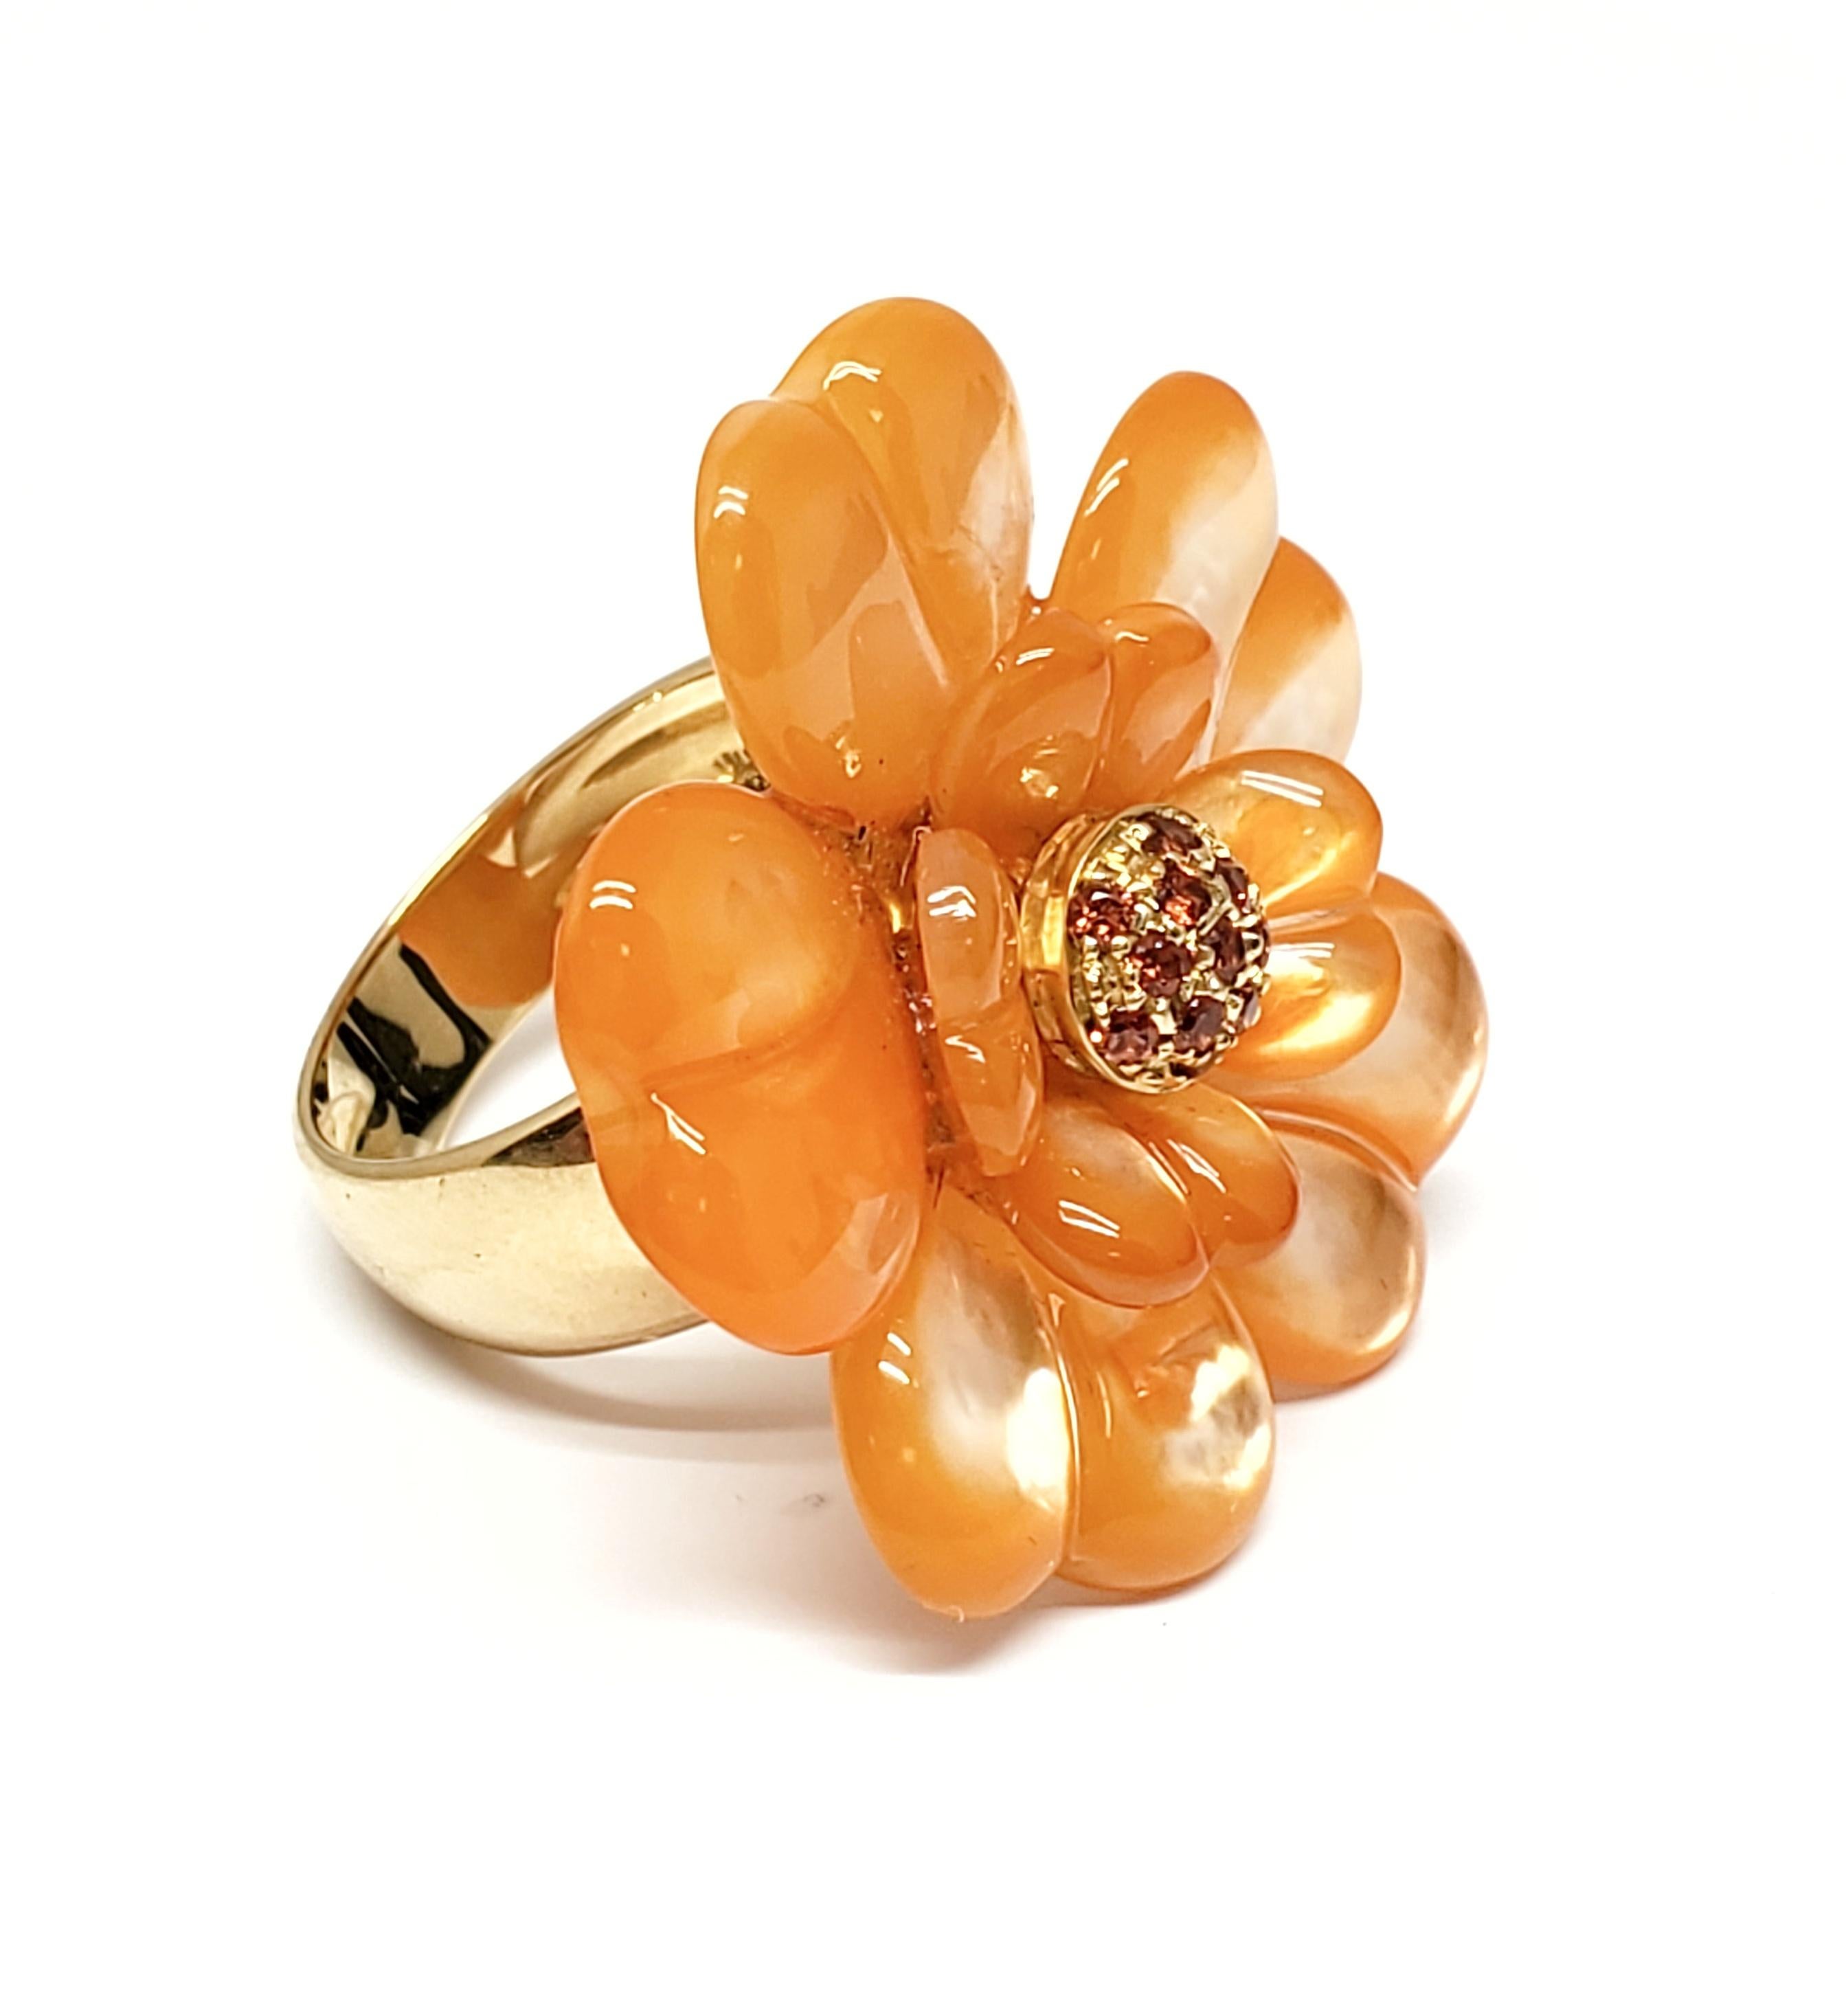 Andreoli Orange Dyed Mother of Pearl Orange Sapphire Flower Cocktail Ring

This Ring features:

0.27 carats of round orange sapphires
Dyed Orange Mother of Pearl
8.55 grams 18 Karat Yellow Gold

Matching earrings available sold separately